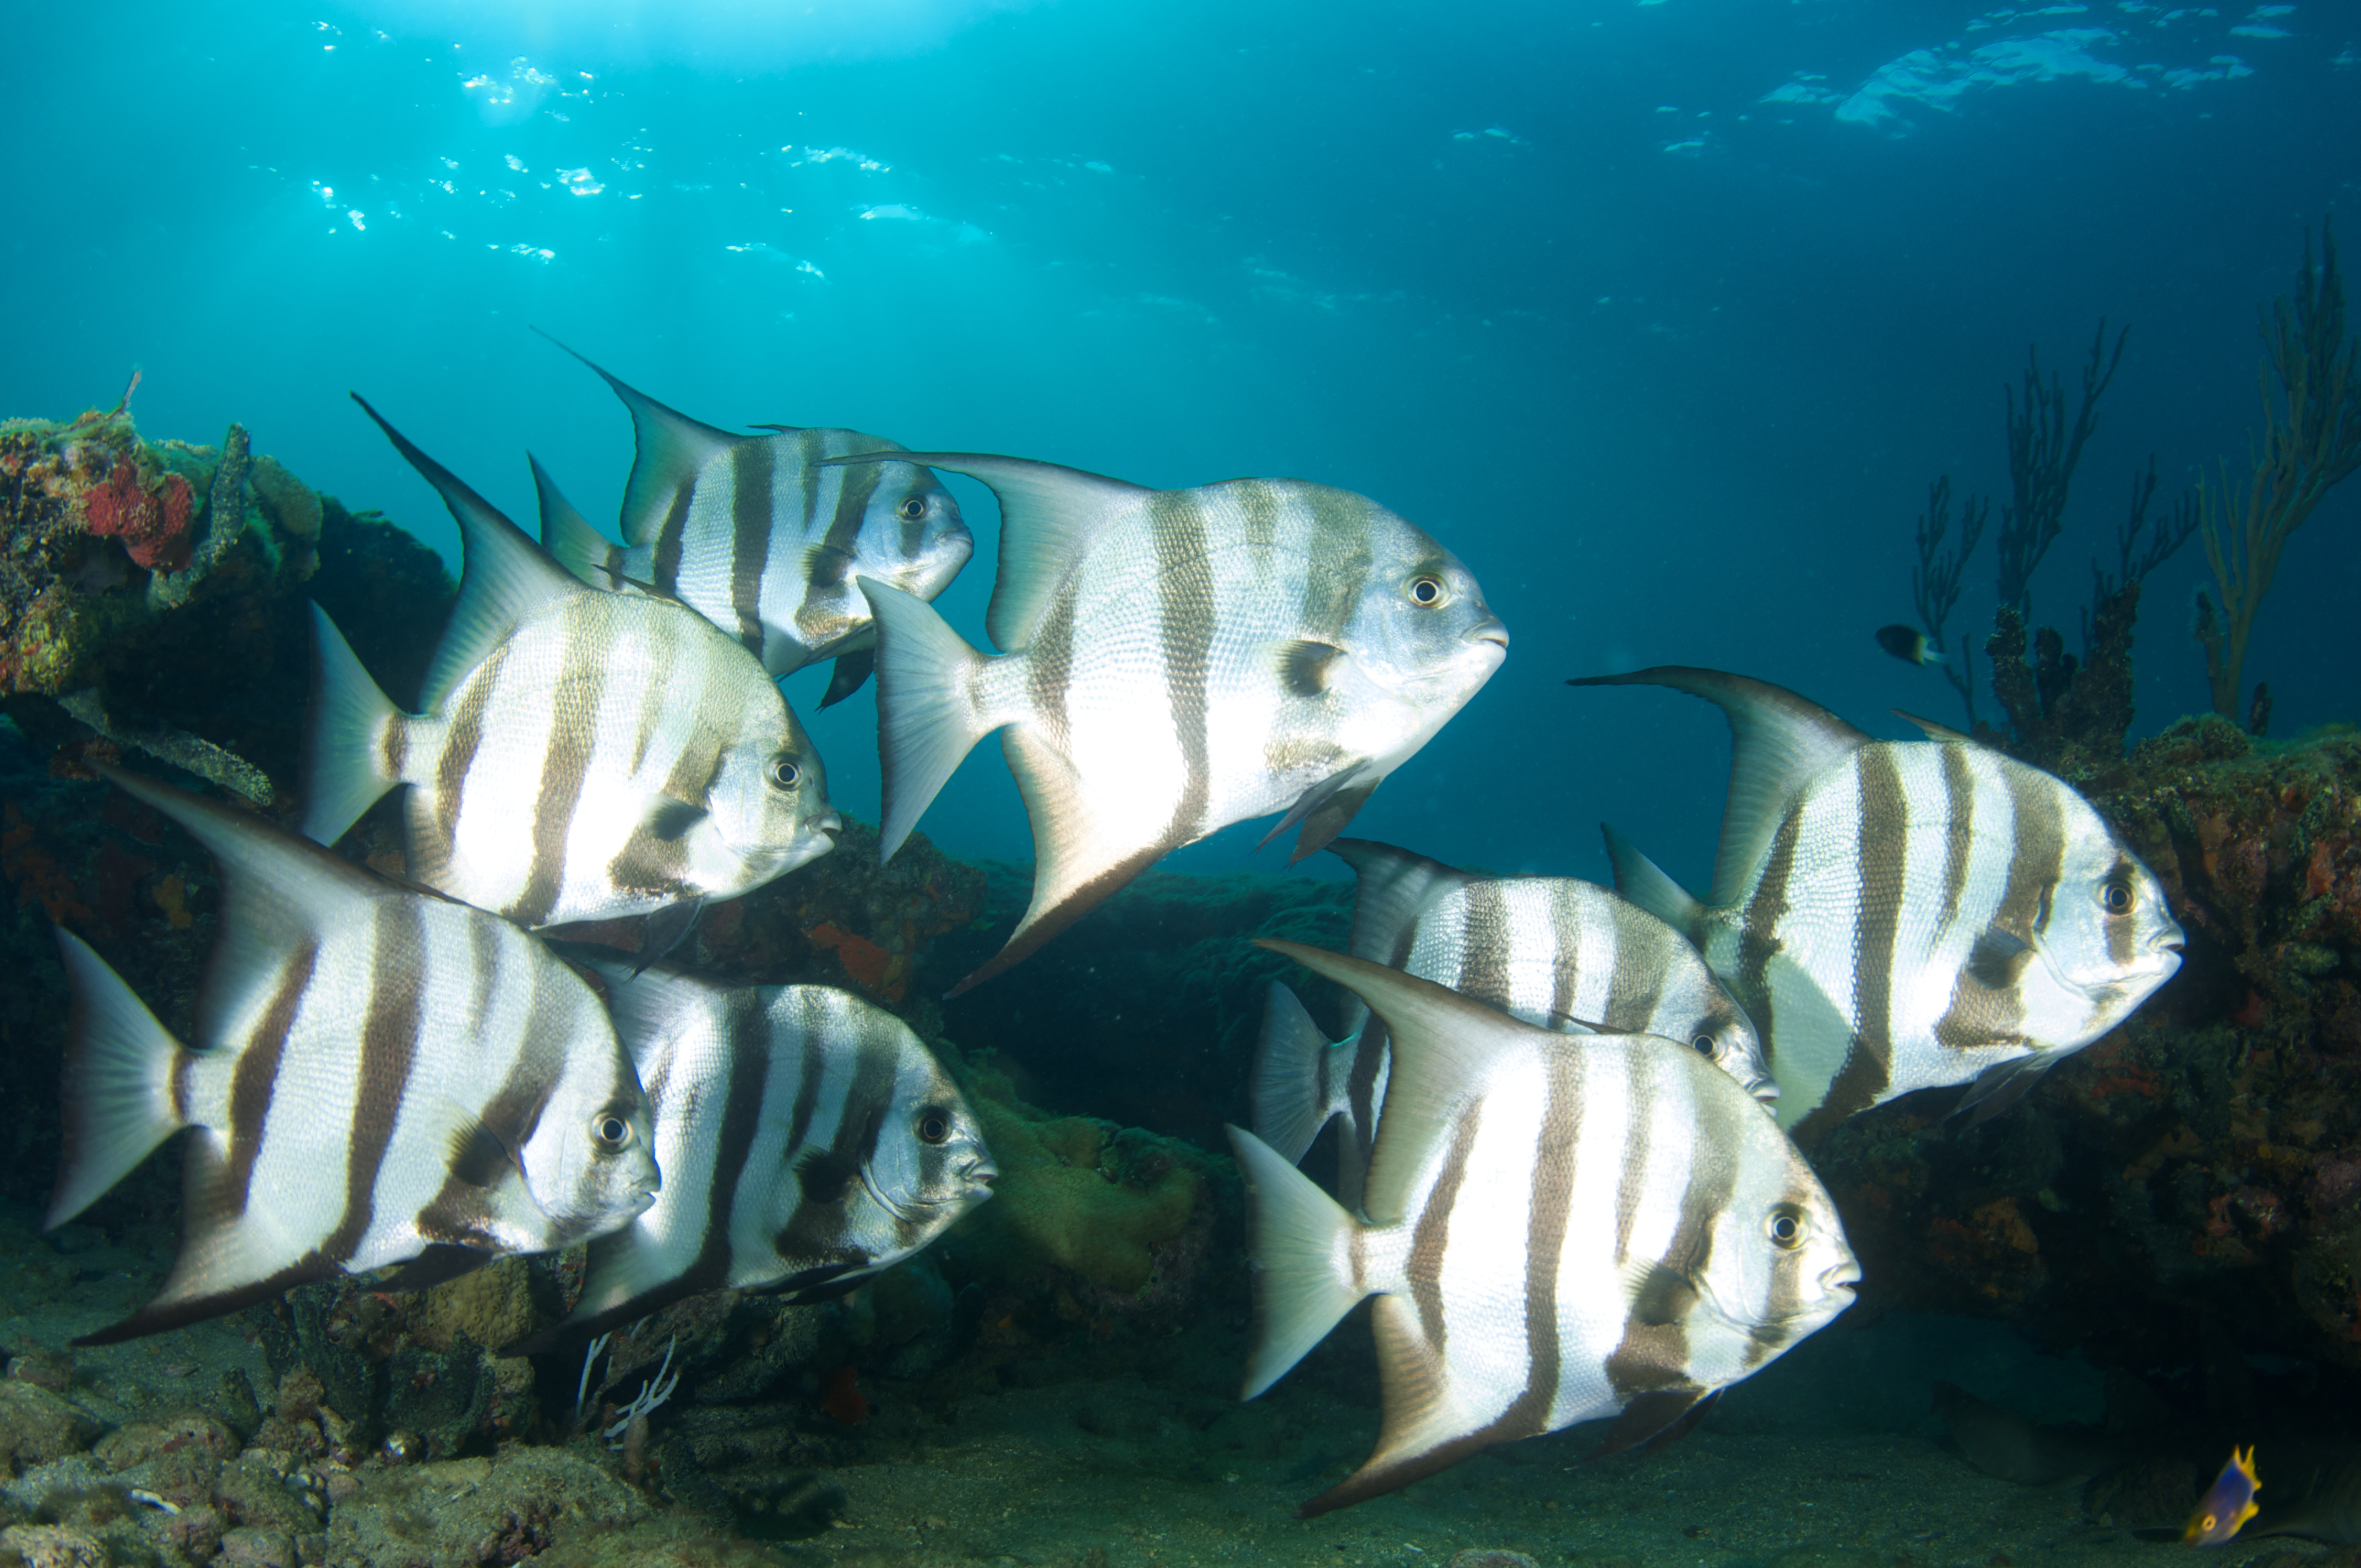 Schooing spadefish make their way along the reef structures at the Tres Cocos Canyon dive site in Ambergris Caye, Belize